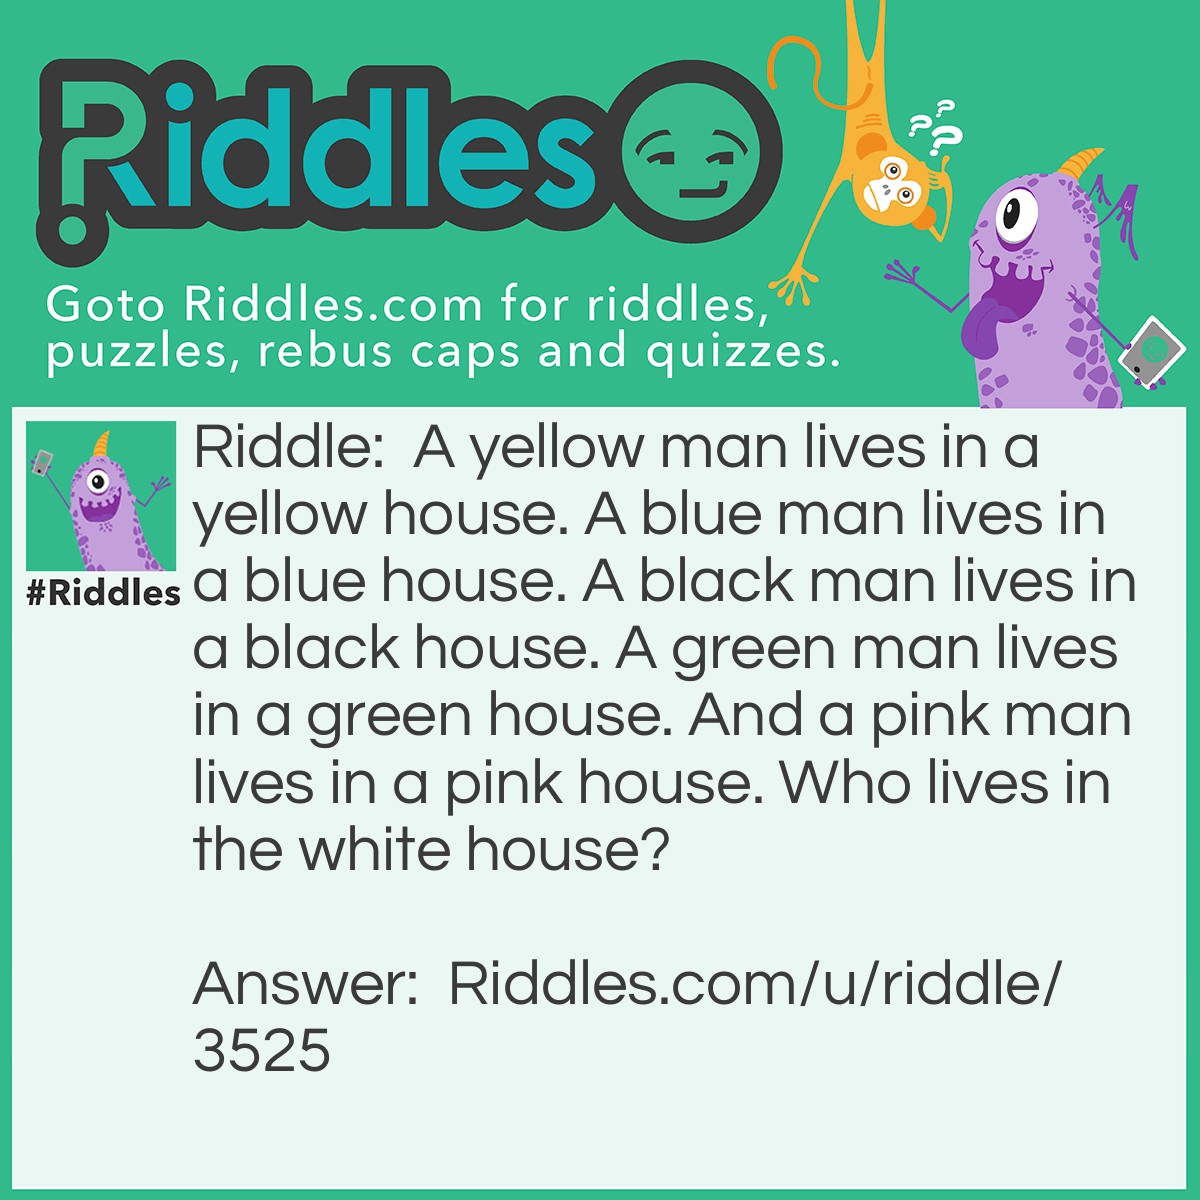 Riddle: A yellow man lives in a yellow house. A blue man lives in a blue house. A black man lives in a black house. A green man lives in a green house. And a pink man lives in a pink house. Who lives in the white house? Answer: The president!